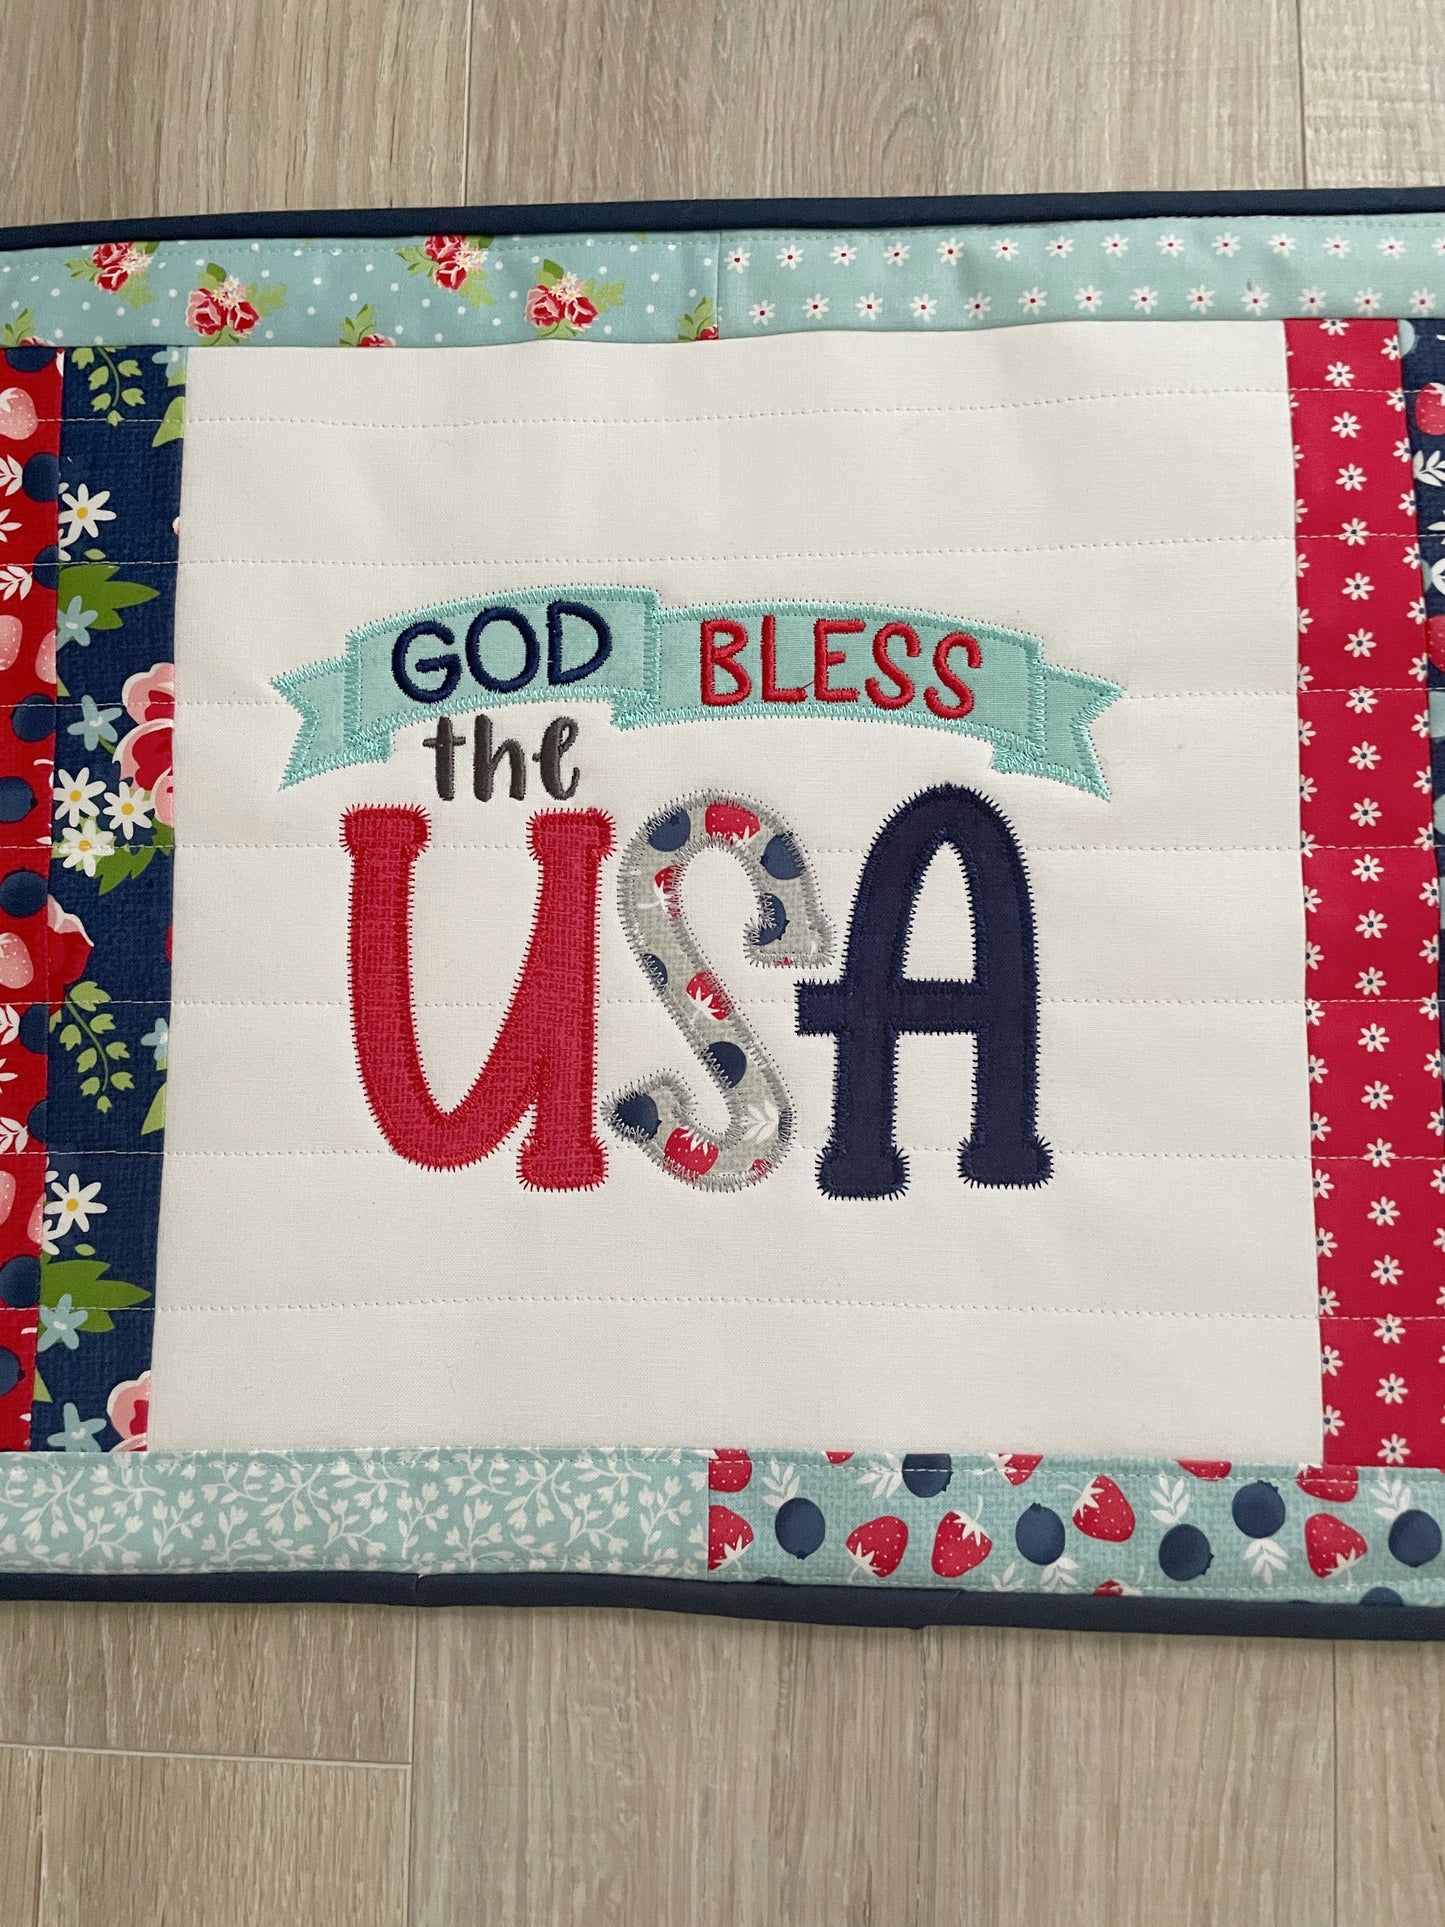 Quilted Large Casserole Hot Pad, Patriotic Kitchen Decor